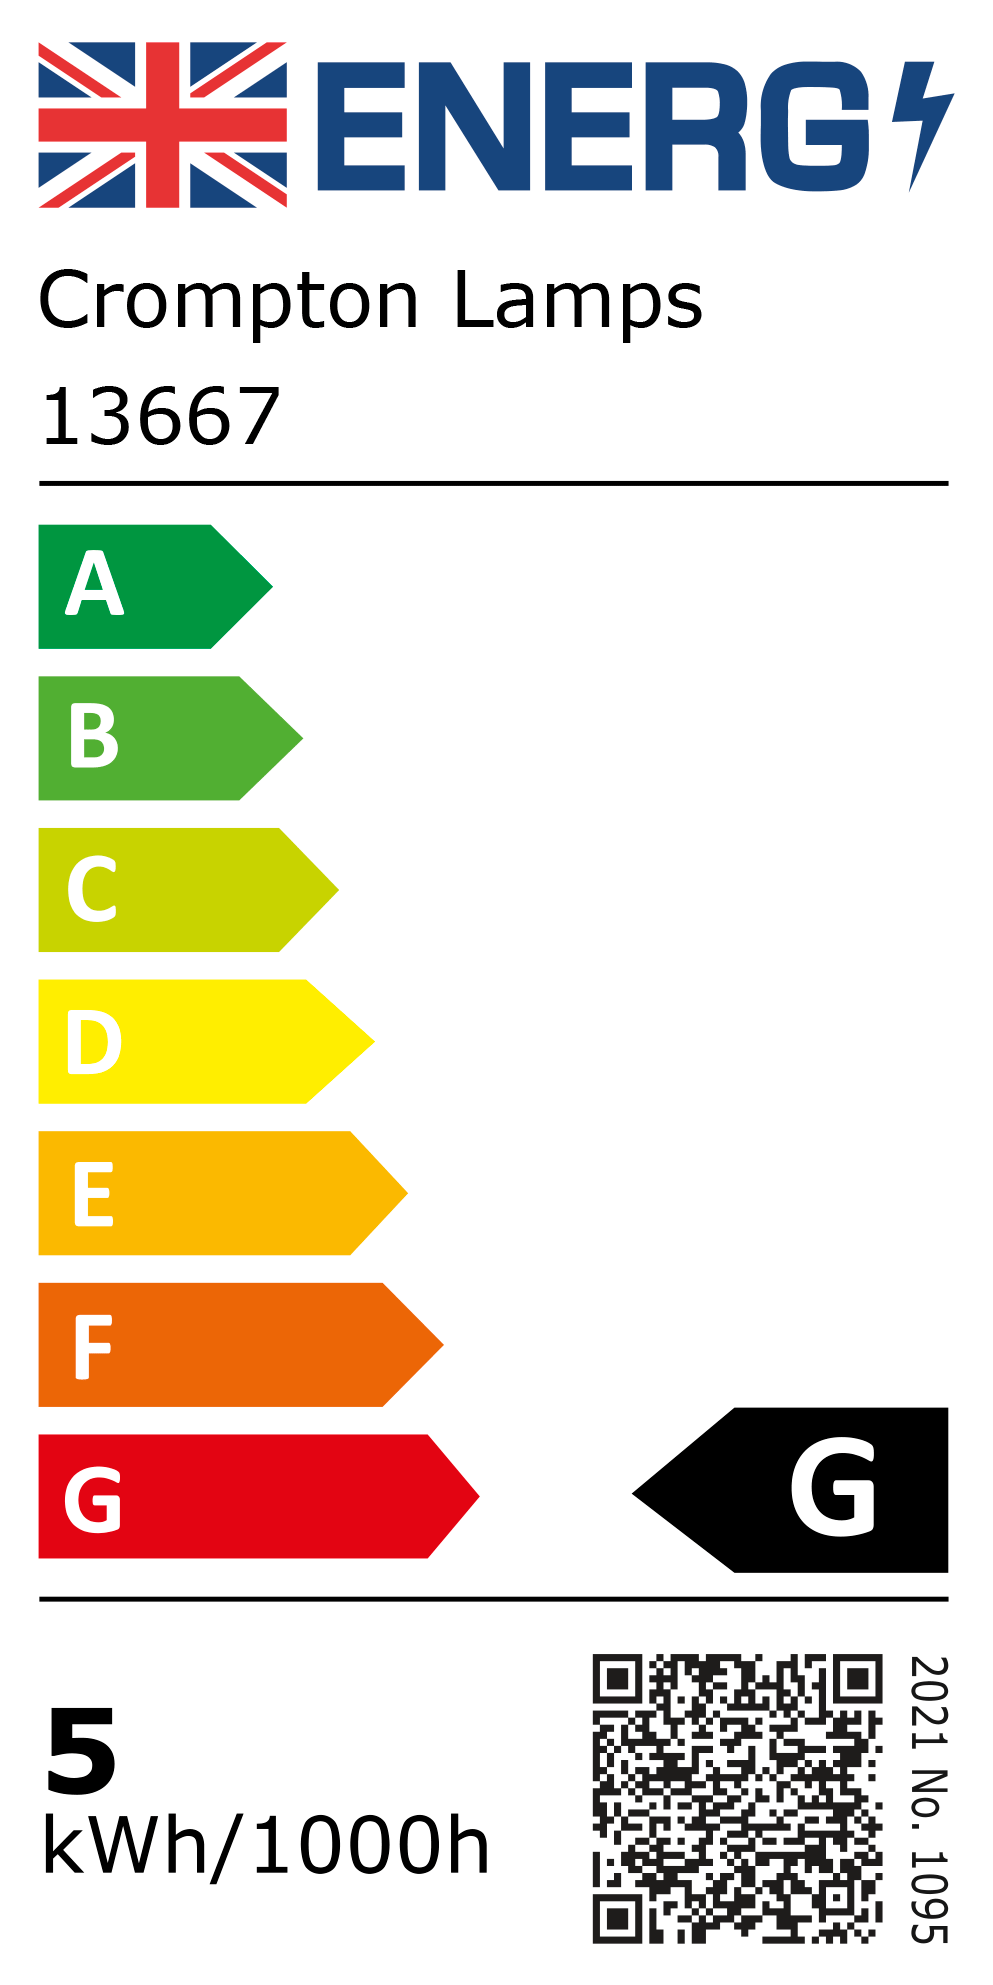 New 2021 Energy Rating Label: Stock Code 13667